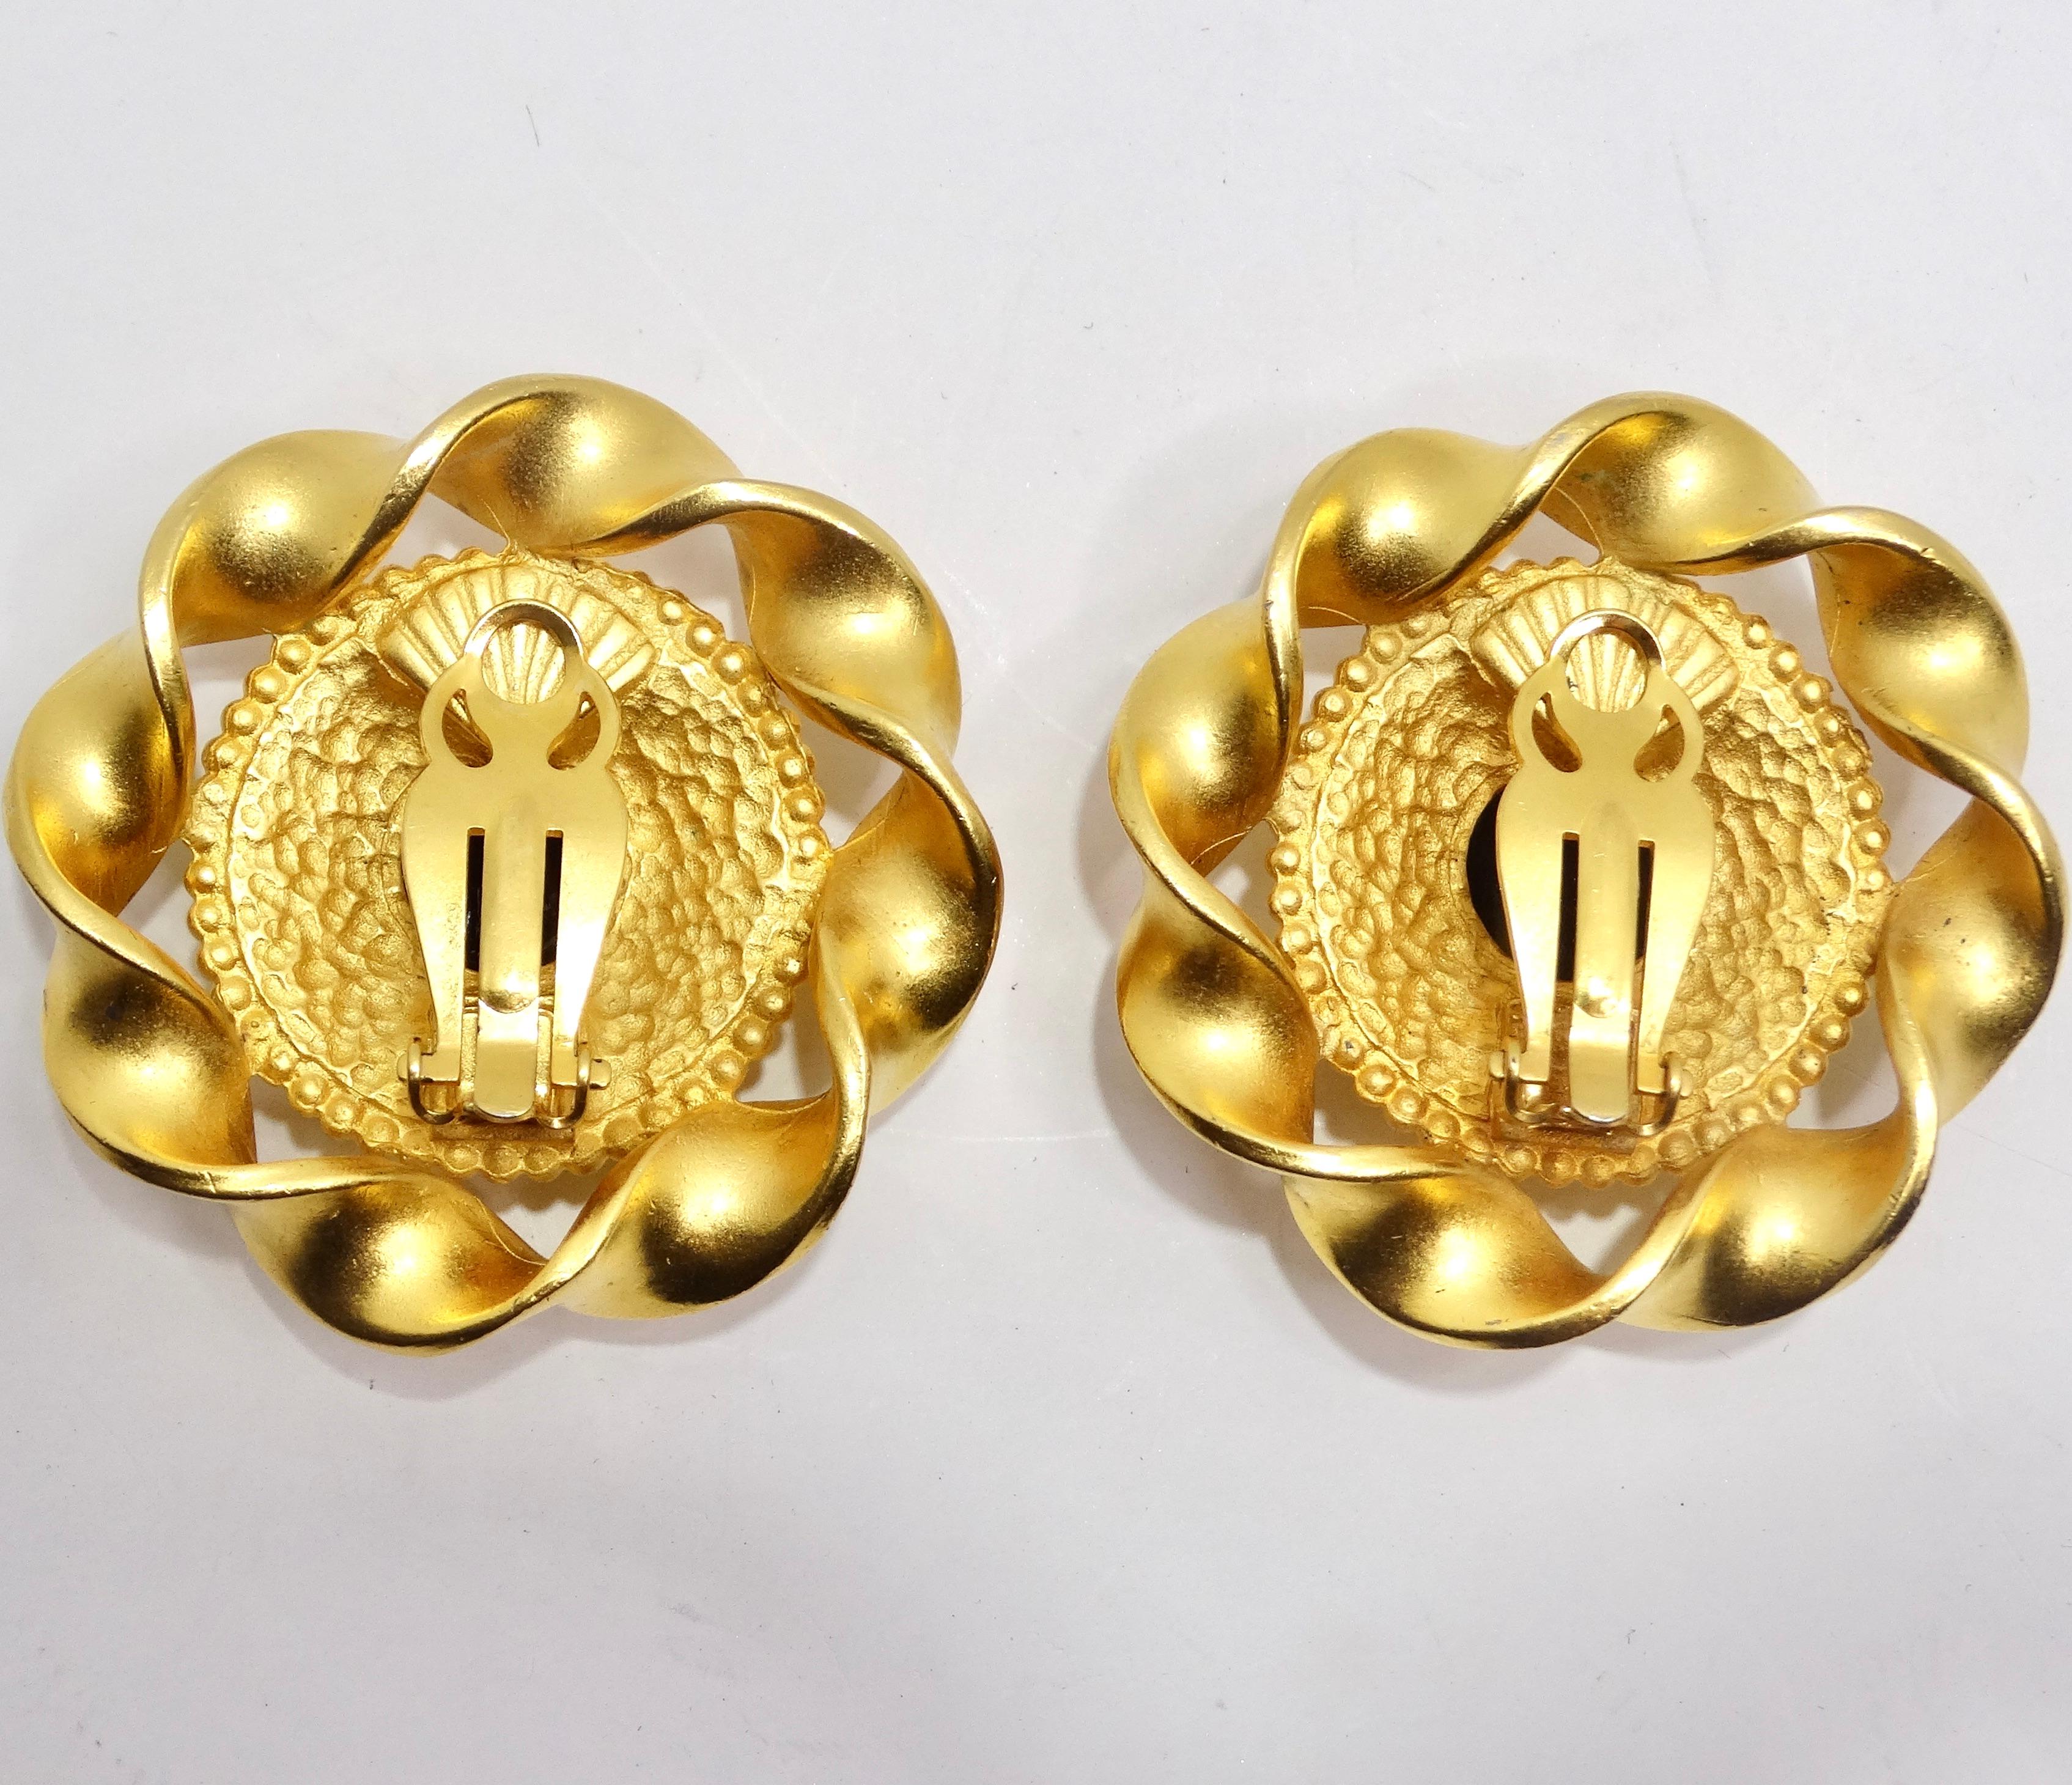 Karl Lagerfeld 1980s Gold Tone Black Stone Clip On Earrings In Excellent Condition For Sale In Scottsdale, AZ